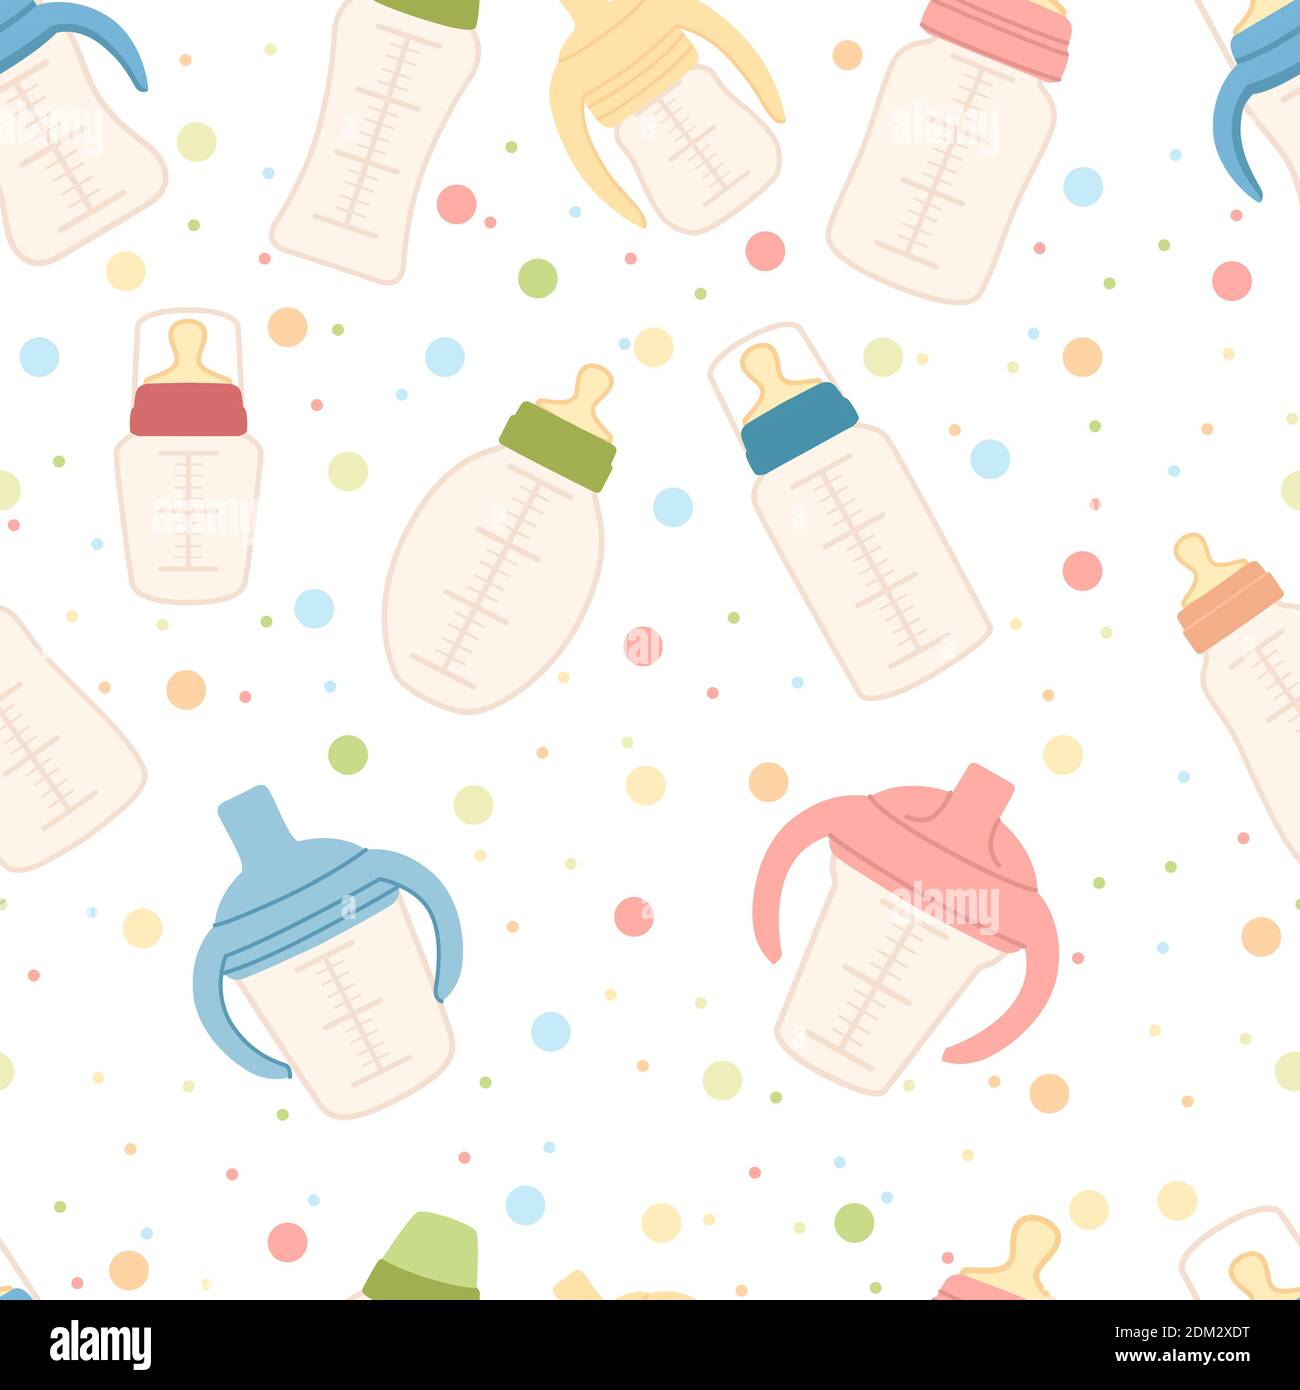 https://c8.alamy.com/comp/2DM2XDT/seamless-pattern-of-plastic-transparent-baby-bottles-with-silicone-nipples-for-feeding-newborns-flat-vector-illustration-on-white-background-2DM2XDT.jpg